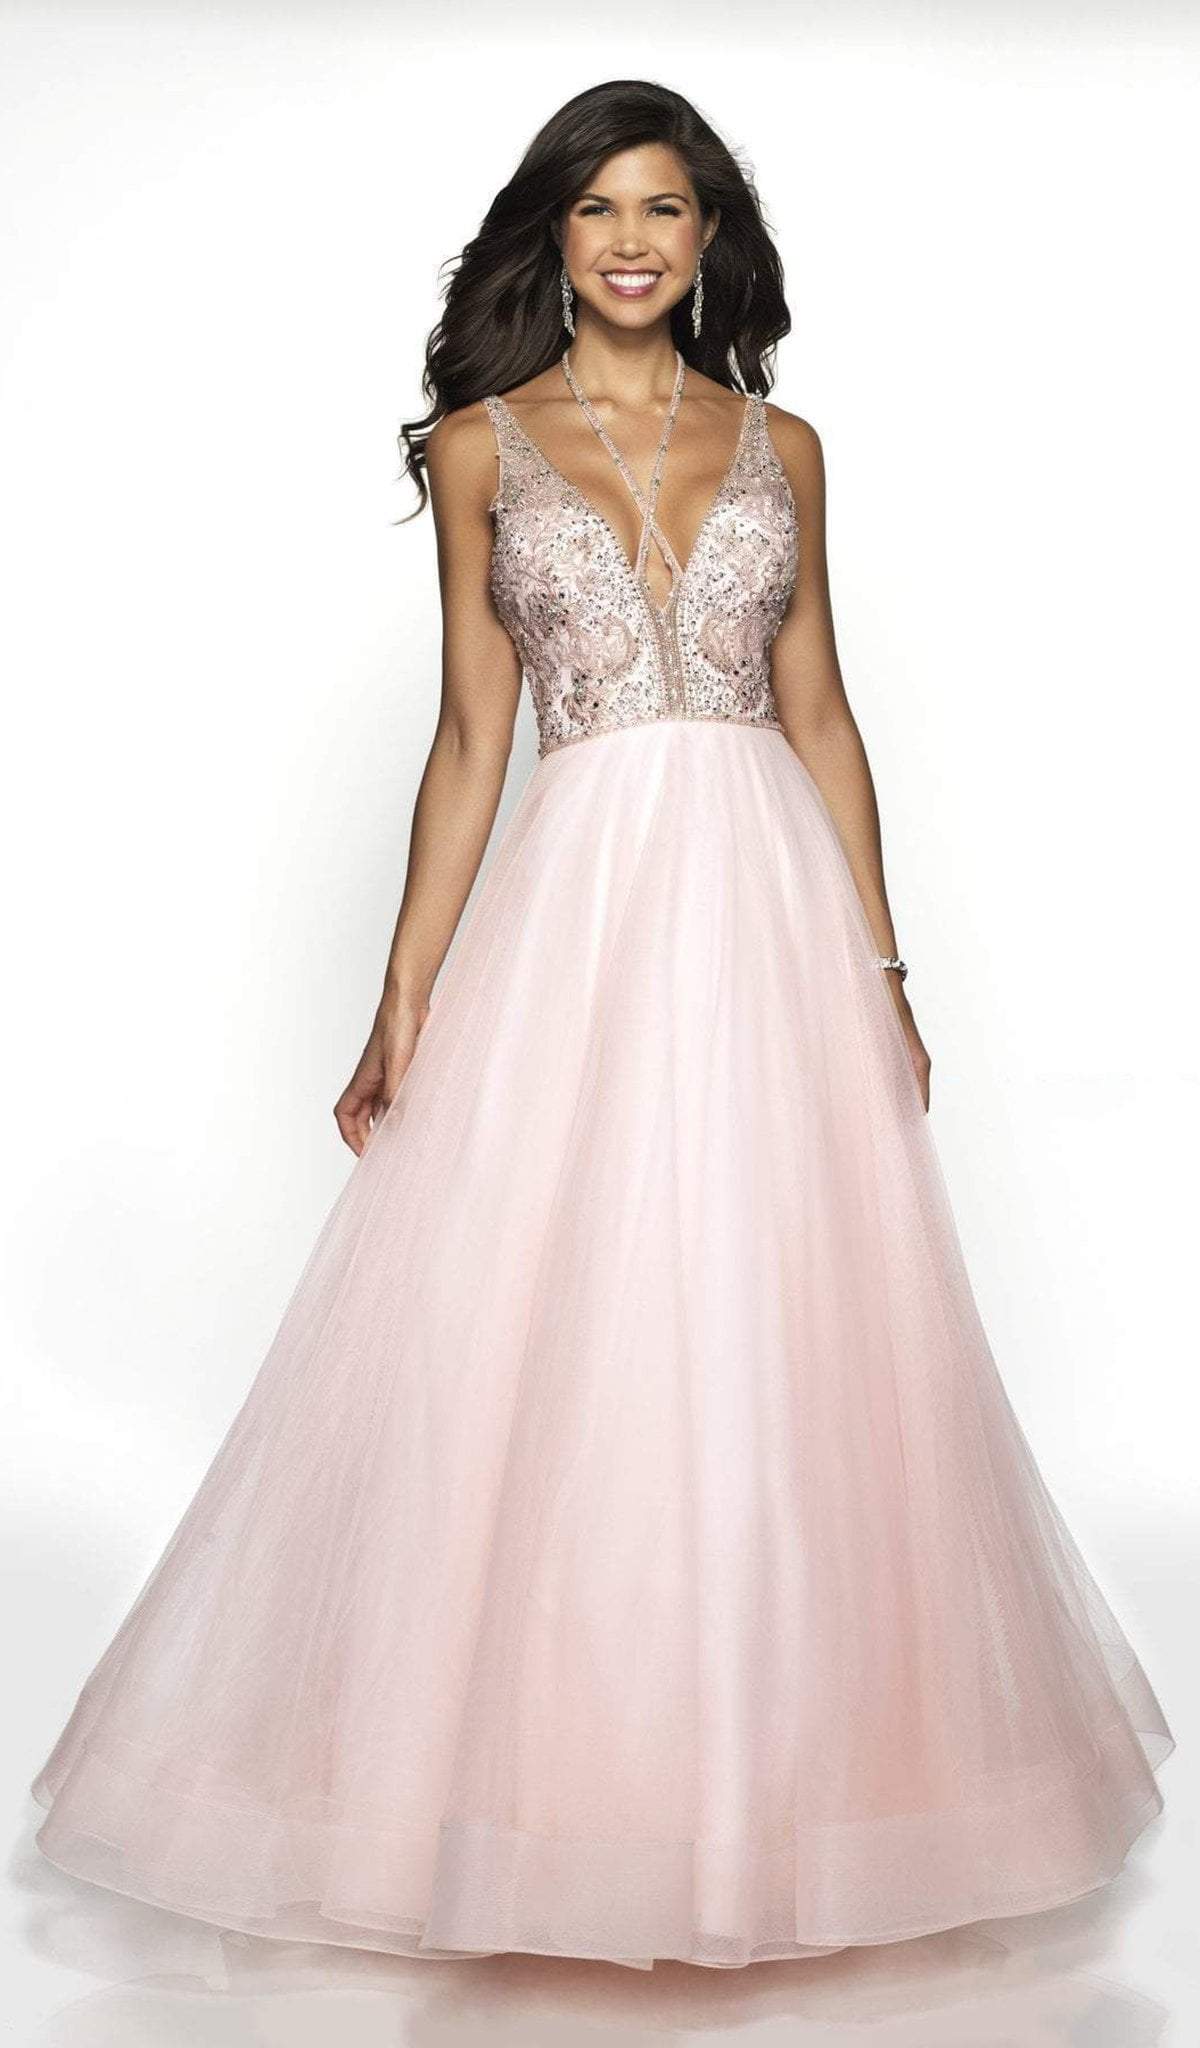 Blush by Alexia Designs - 5716 Beaded Plunging Halter V-neck Ballgown In Pink